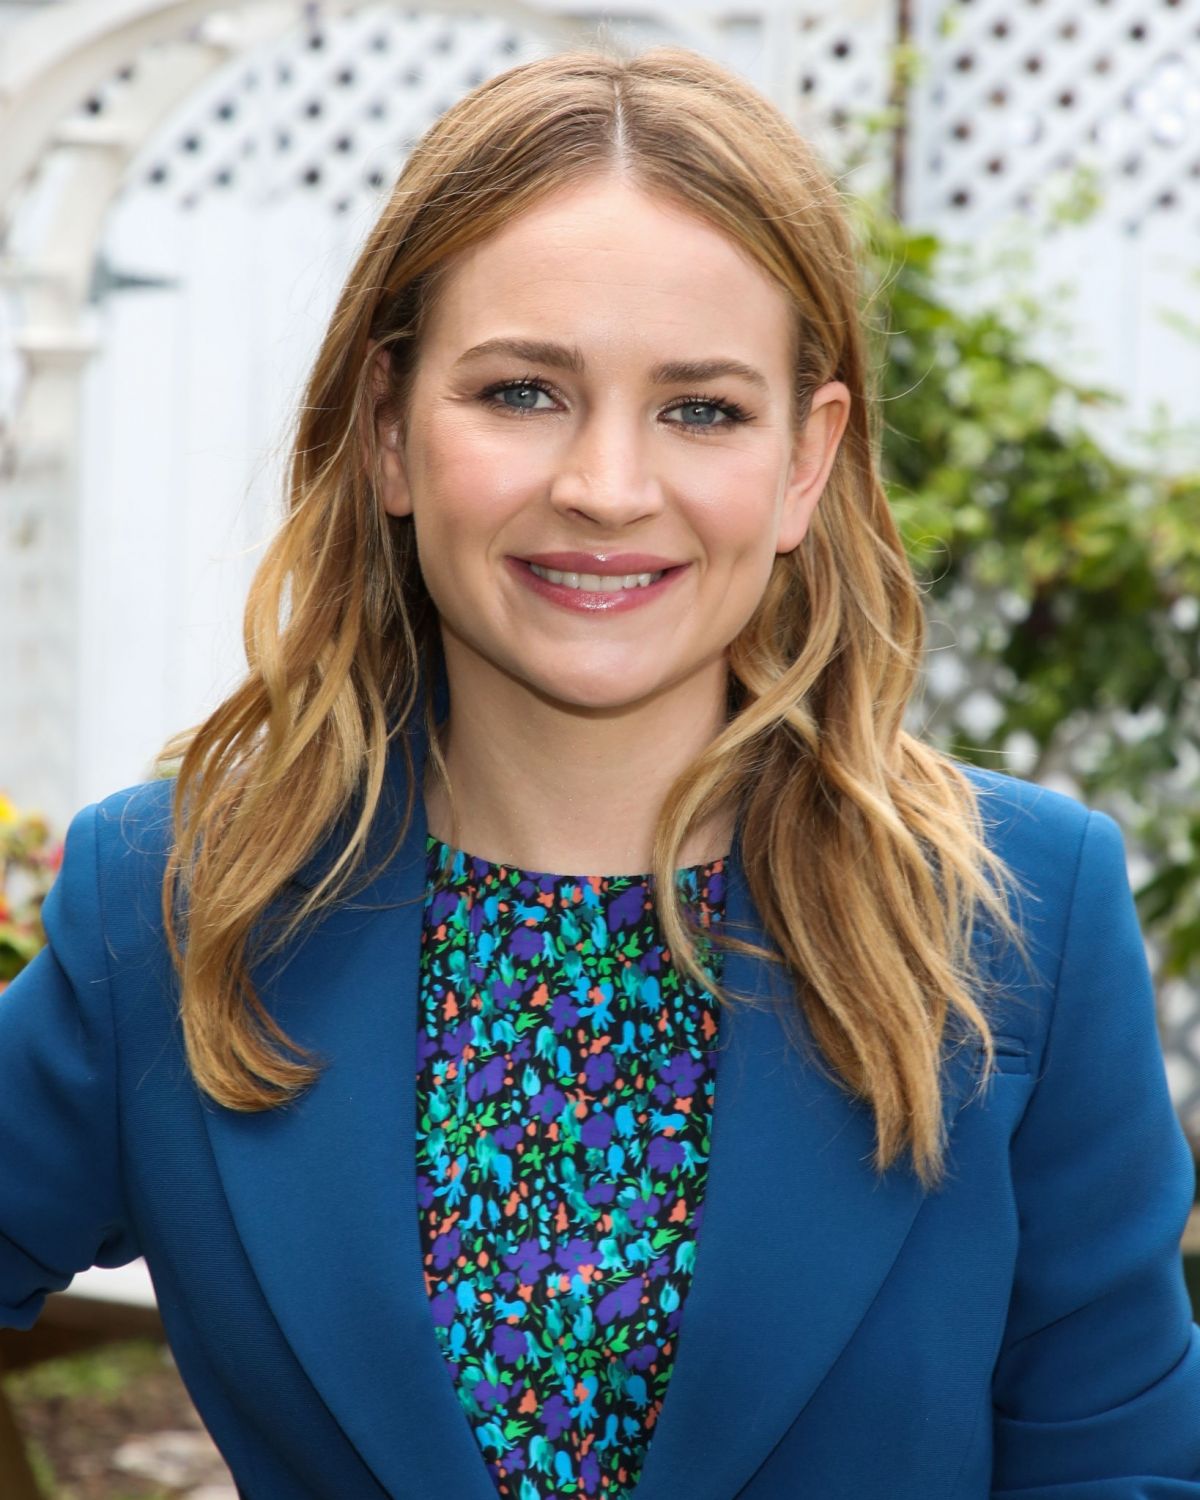 Albums 101+ Images latest photos of britt robertson Completed